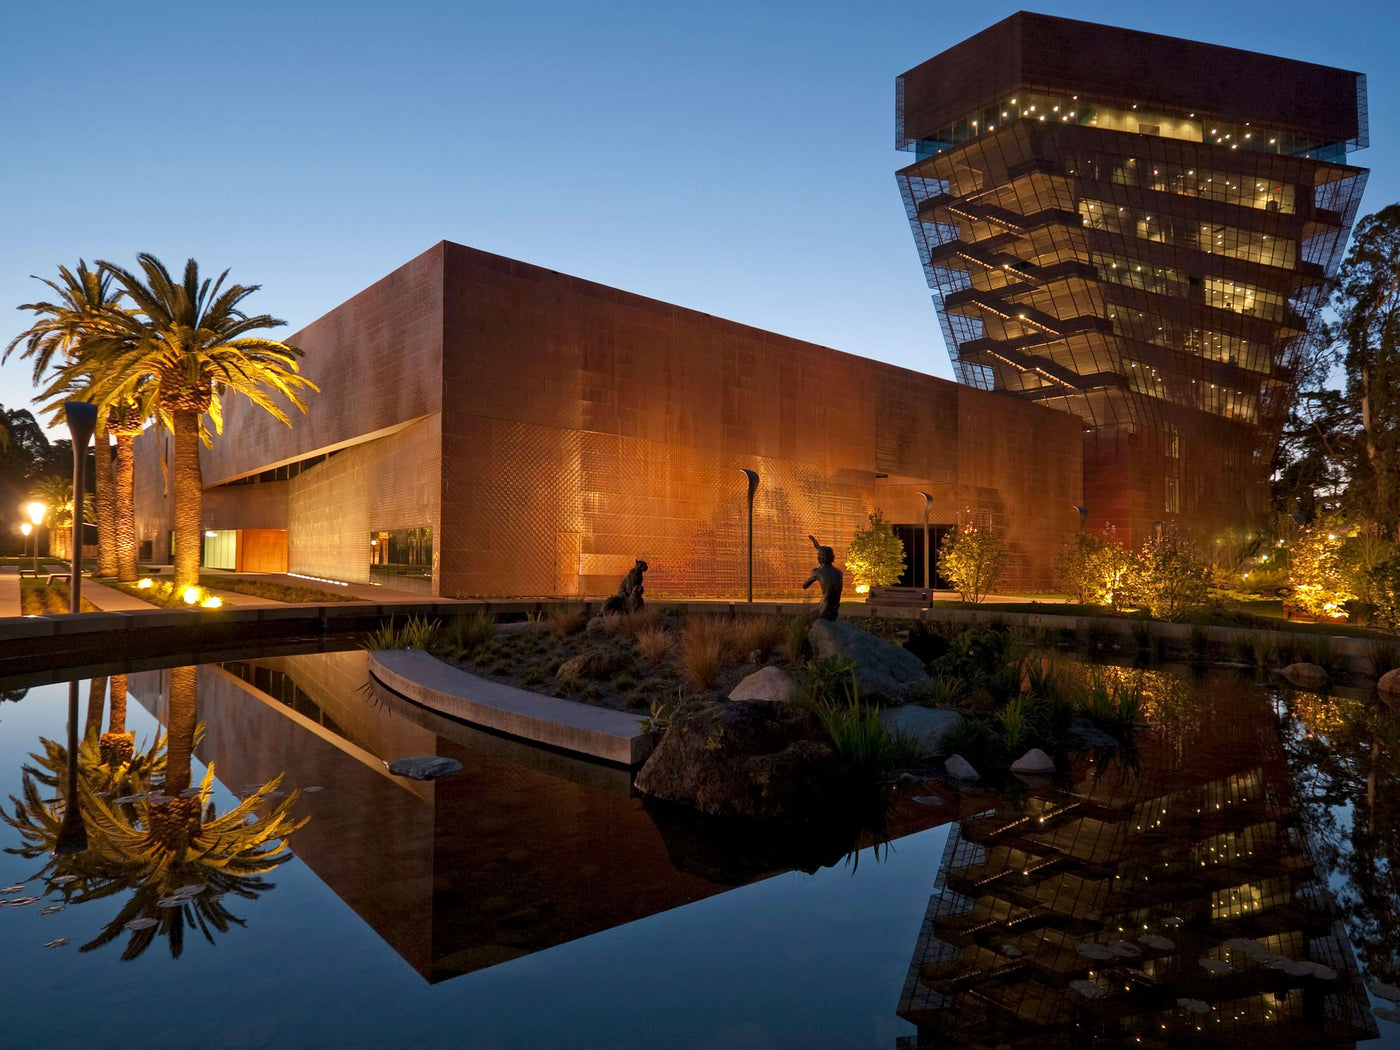 de Young Museum. Make the most of your visit.